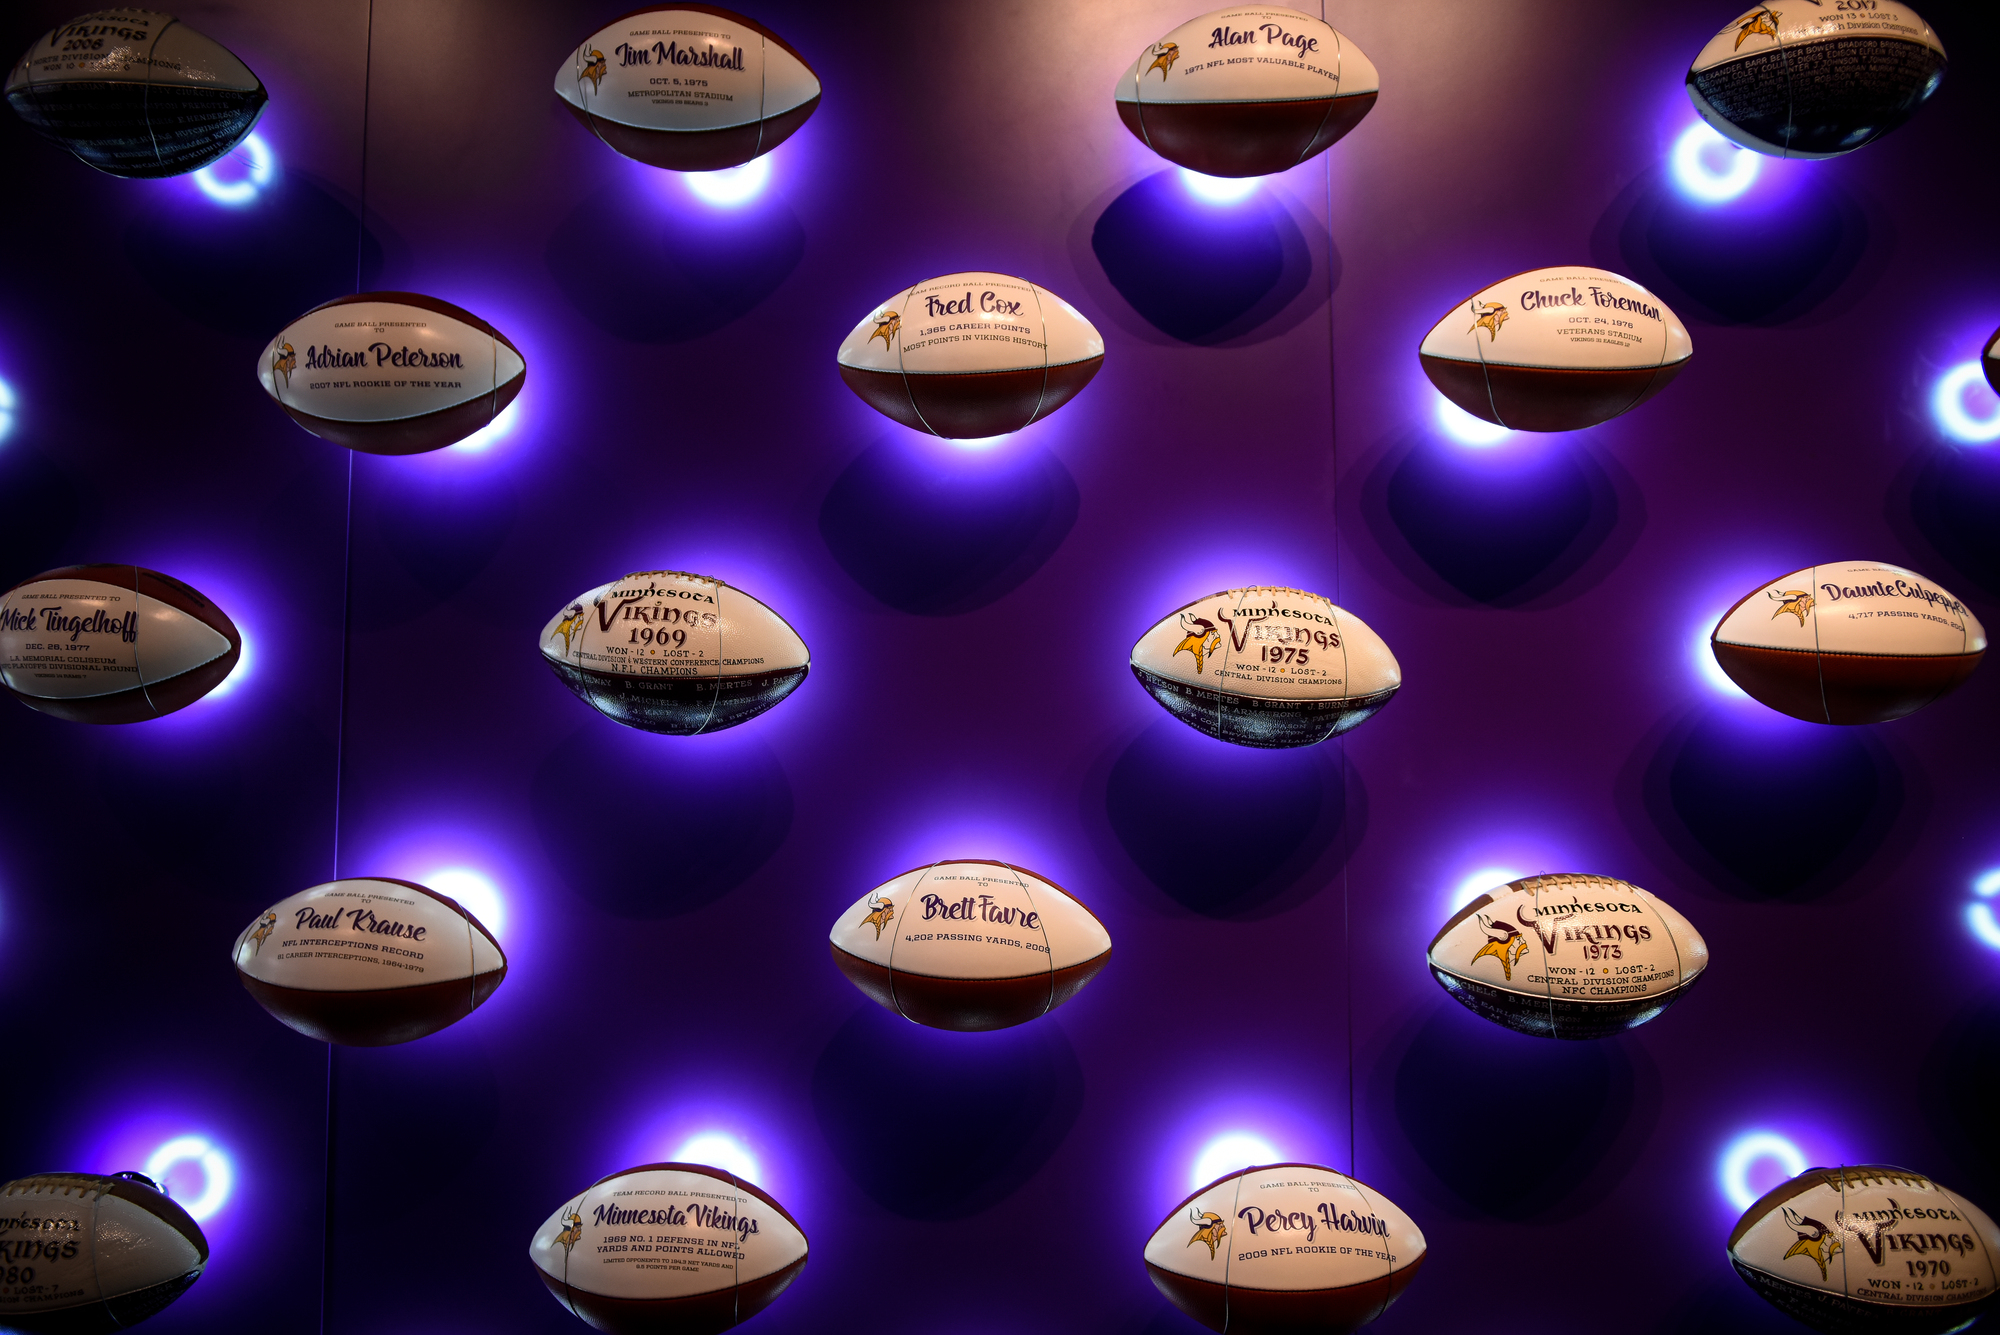 The Triumphs in Battle Wall, containing various game balls from Vikings history.